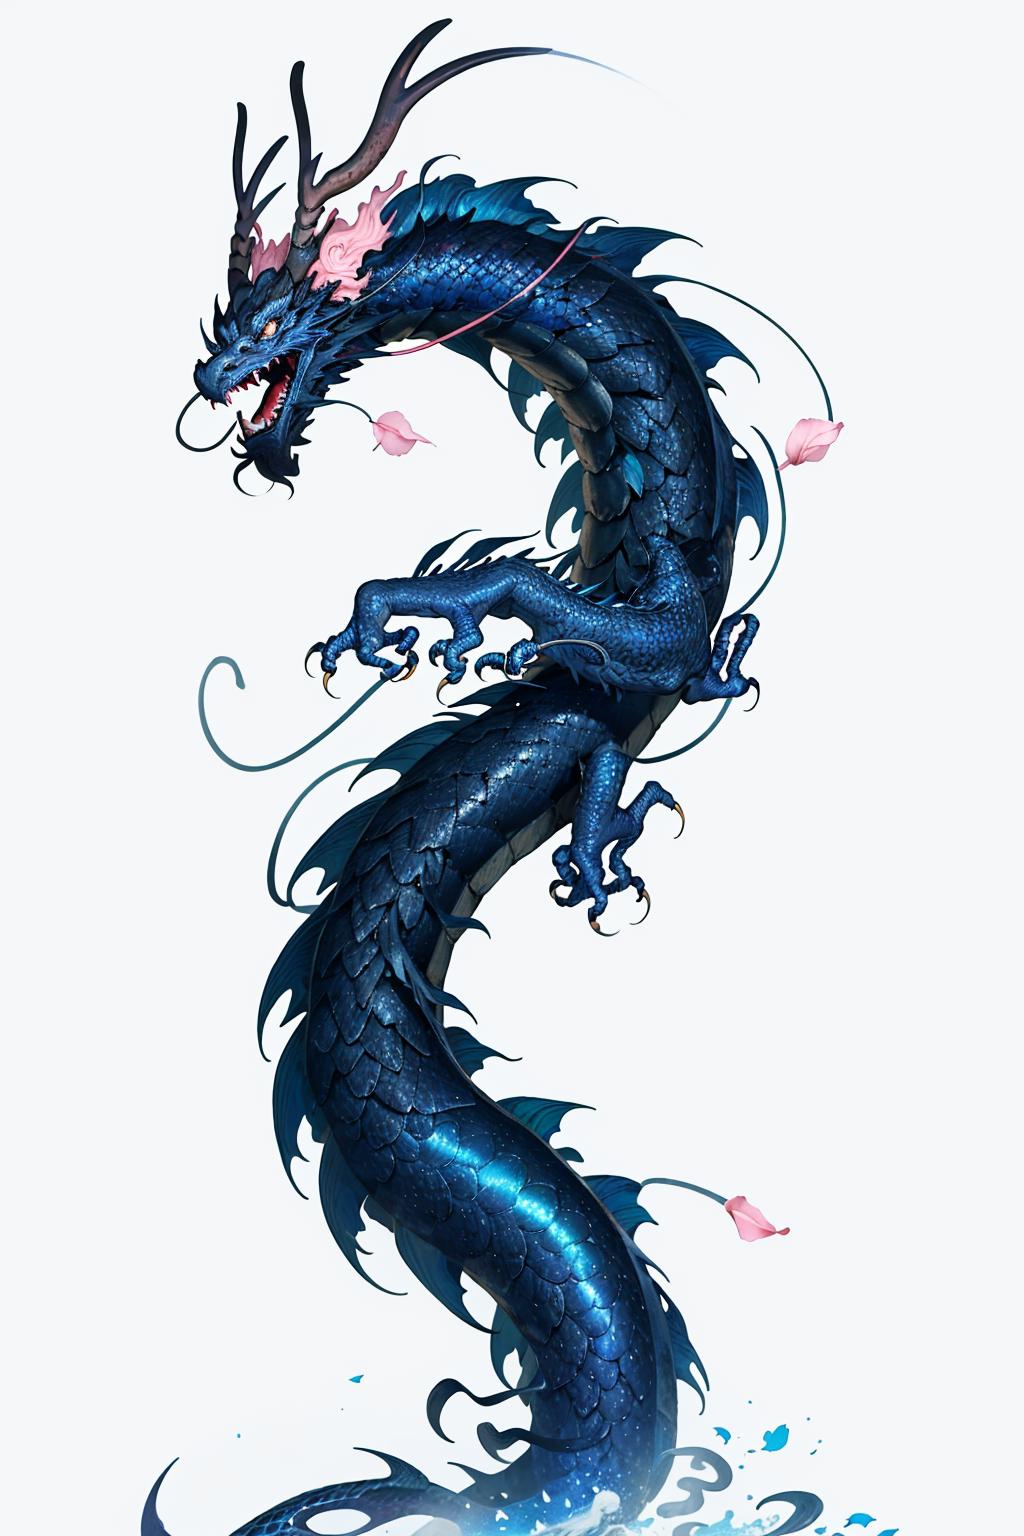 concept Loong(china dragon\eastern dragon)中国龙 image by Everynyan